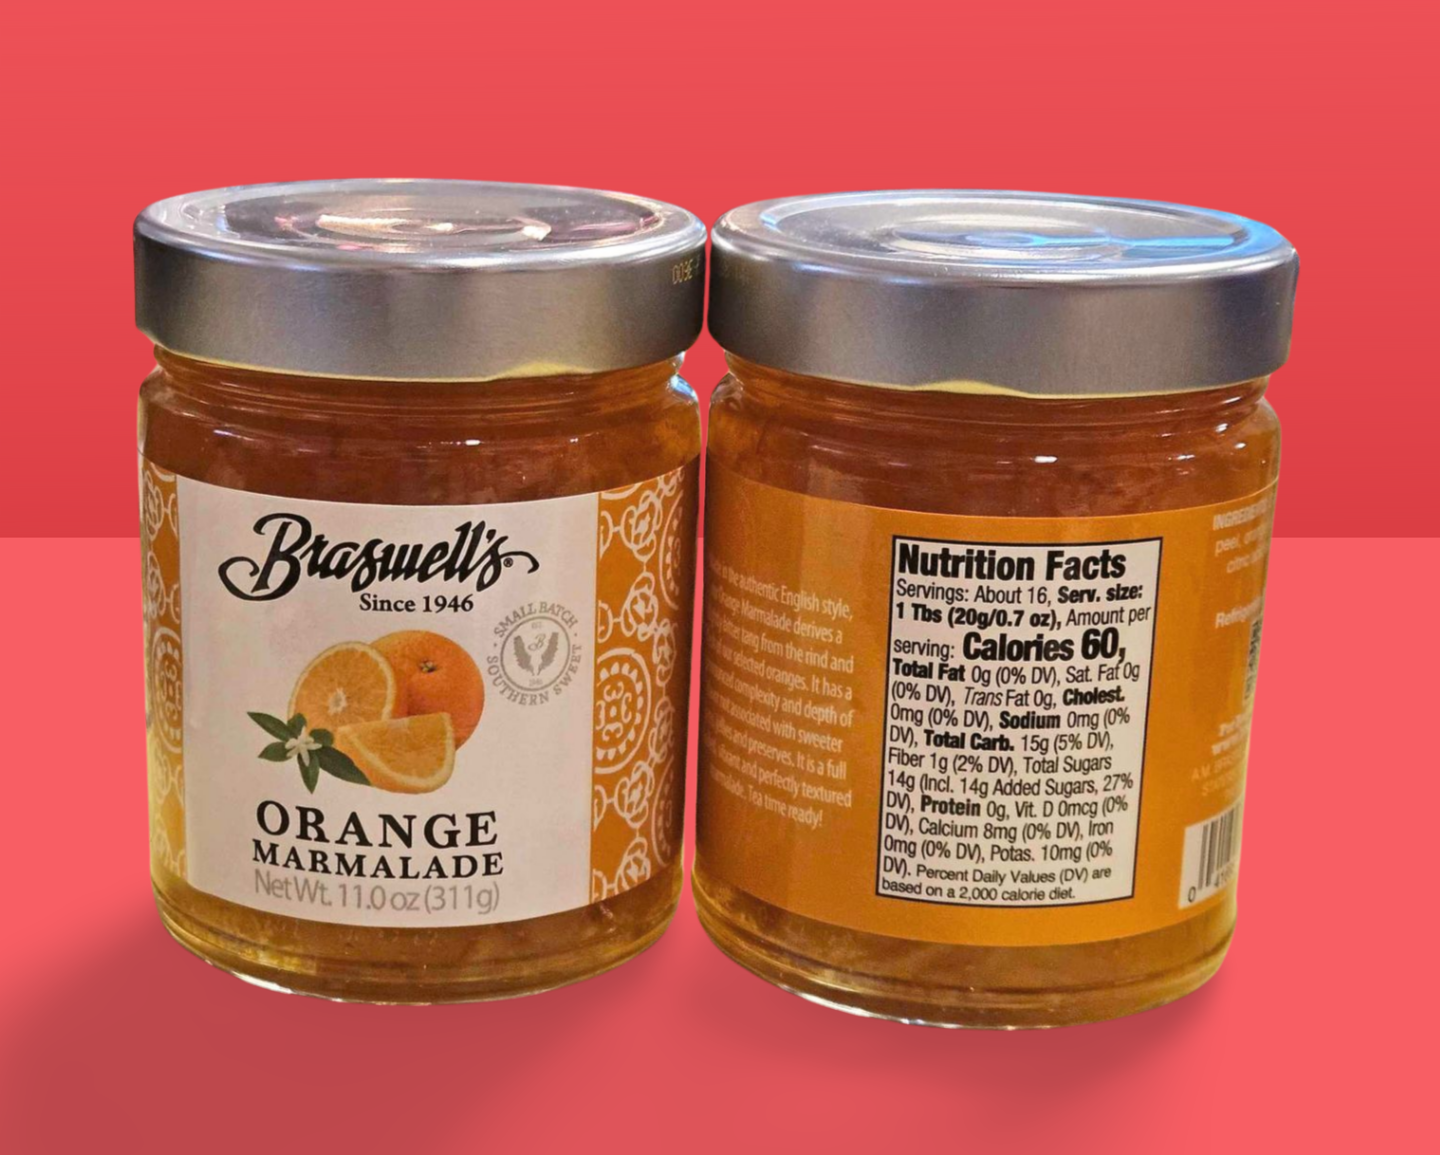 Braswell's Orange Marmalade 11 oz - Dusty's Country Store